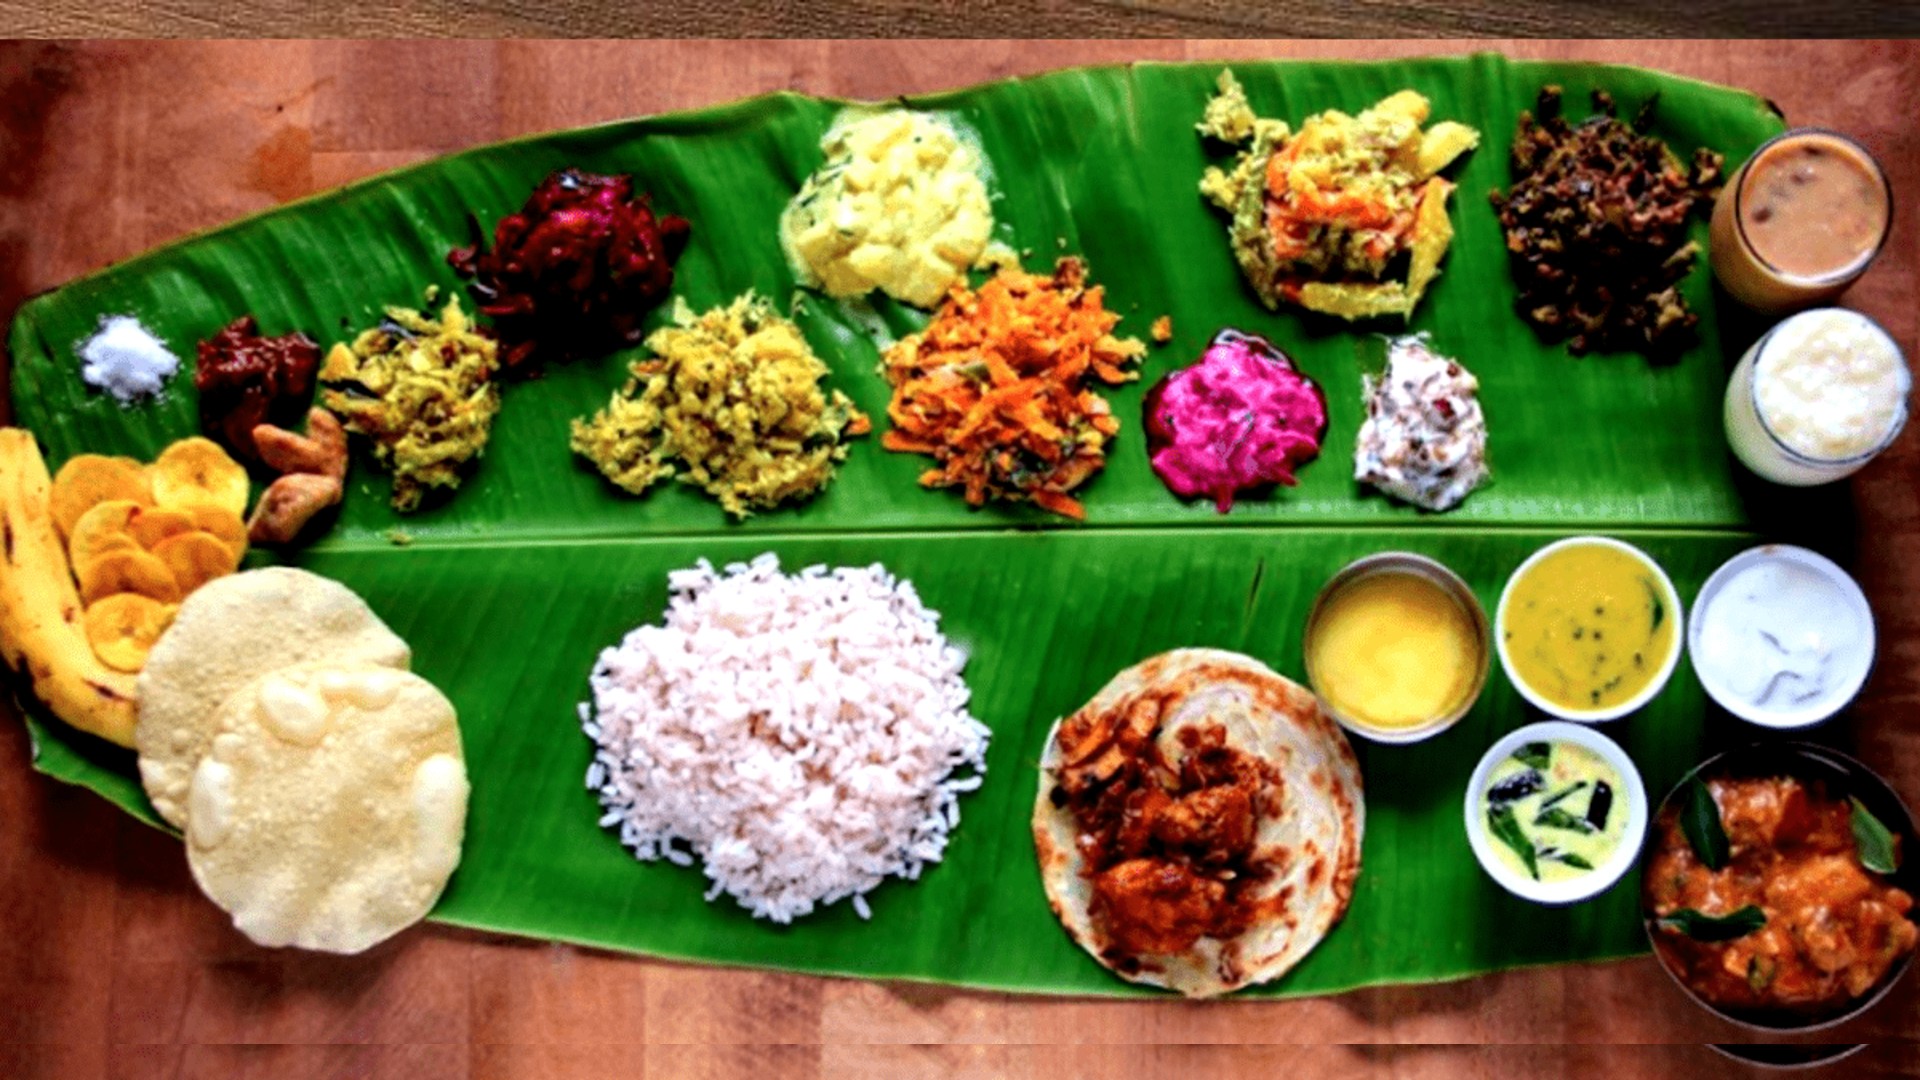 7 South Indian Comfort Meals To Boost Your Immunity & Fight COVID-19